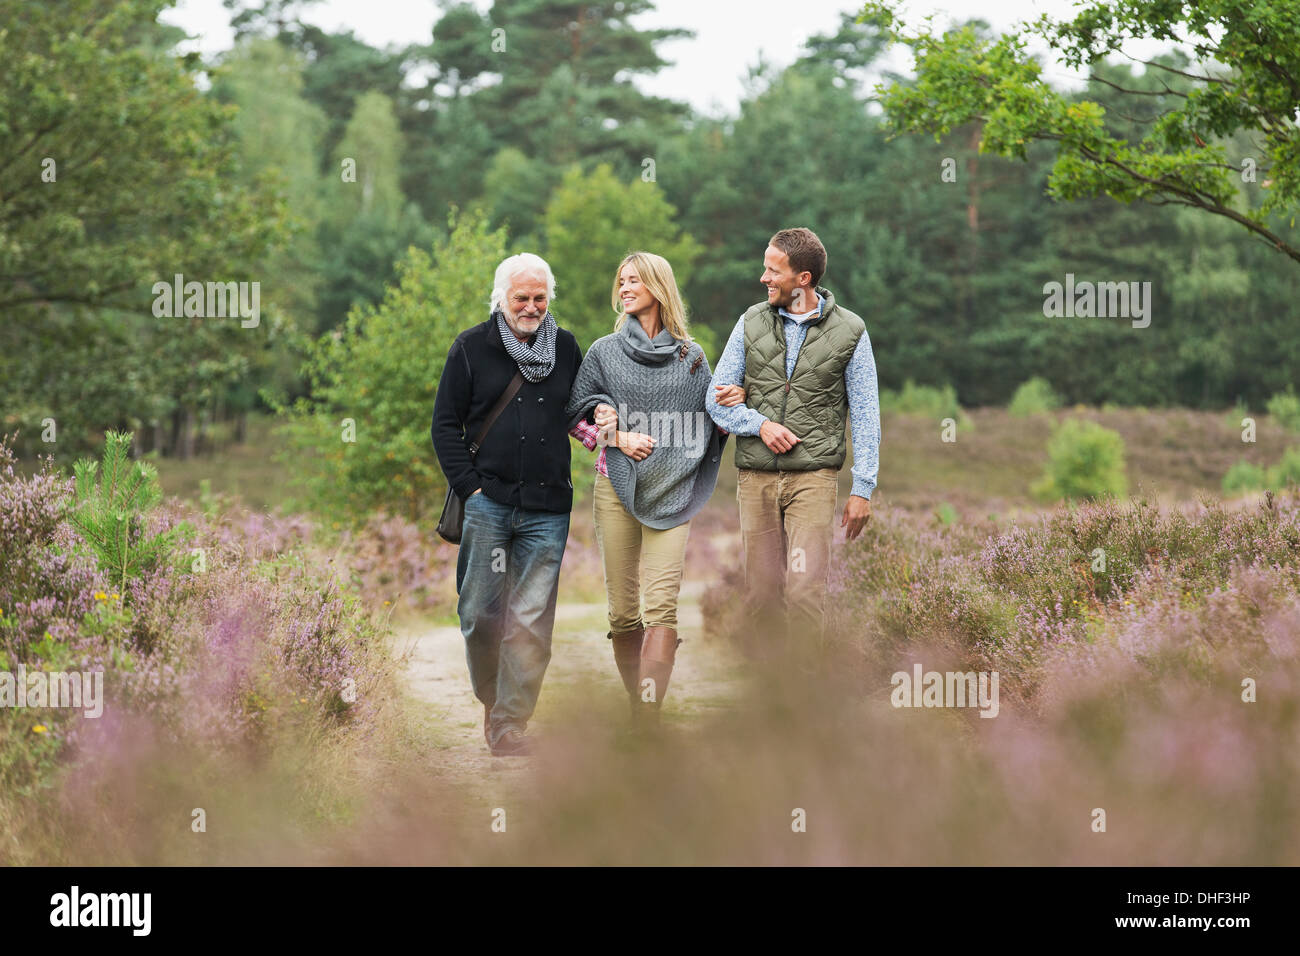 Man, man and woman walking through forest Banque D'Images